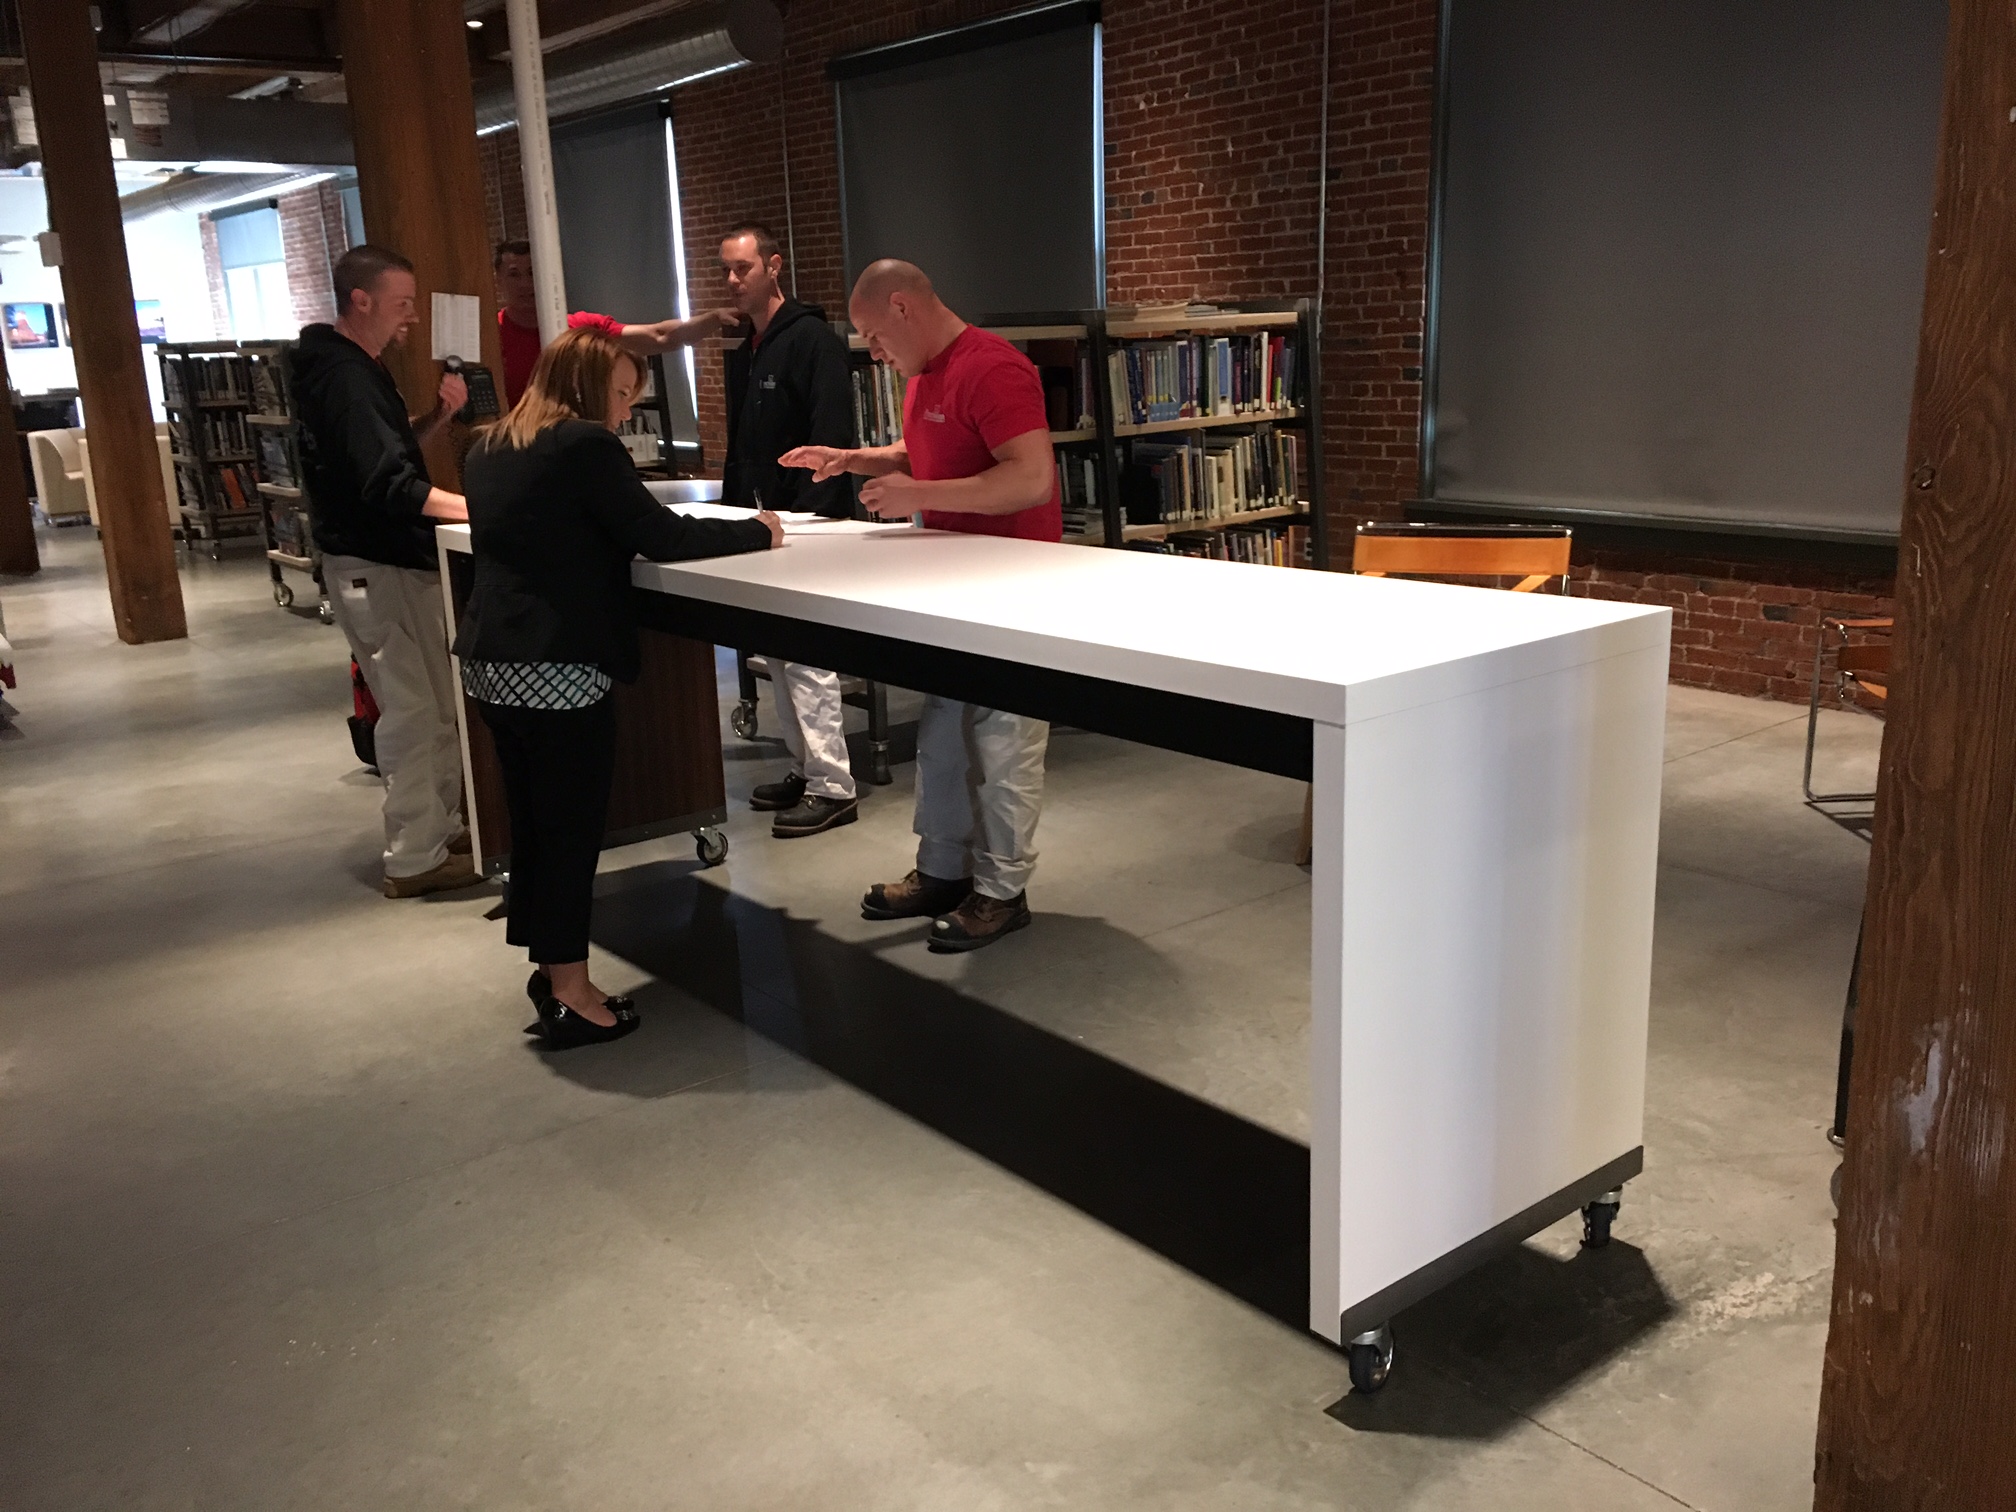 Hi5 Union 2.0 Tables in open workspace